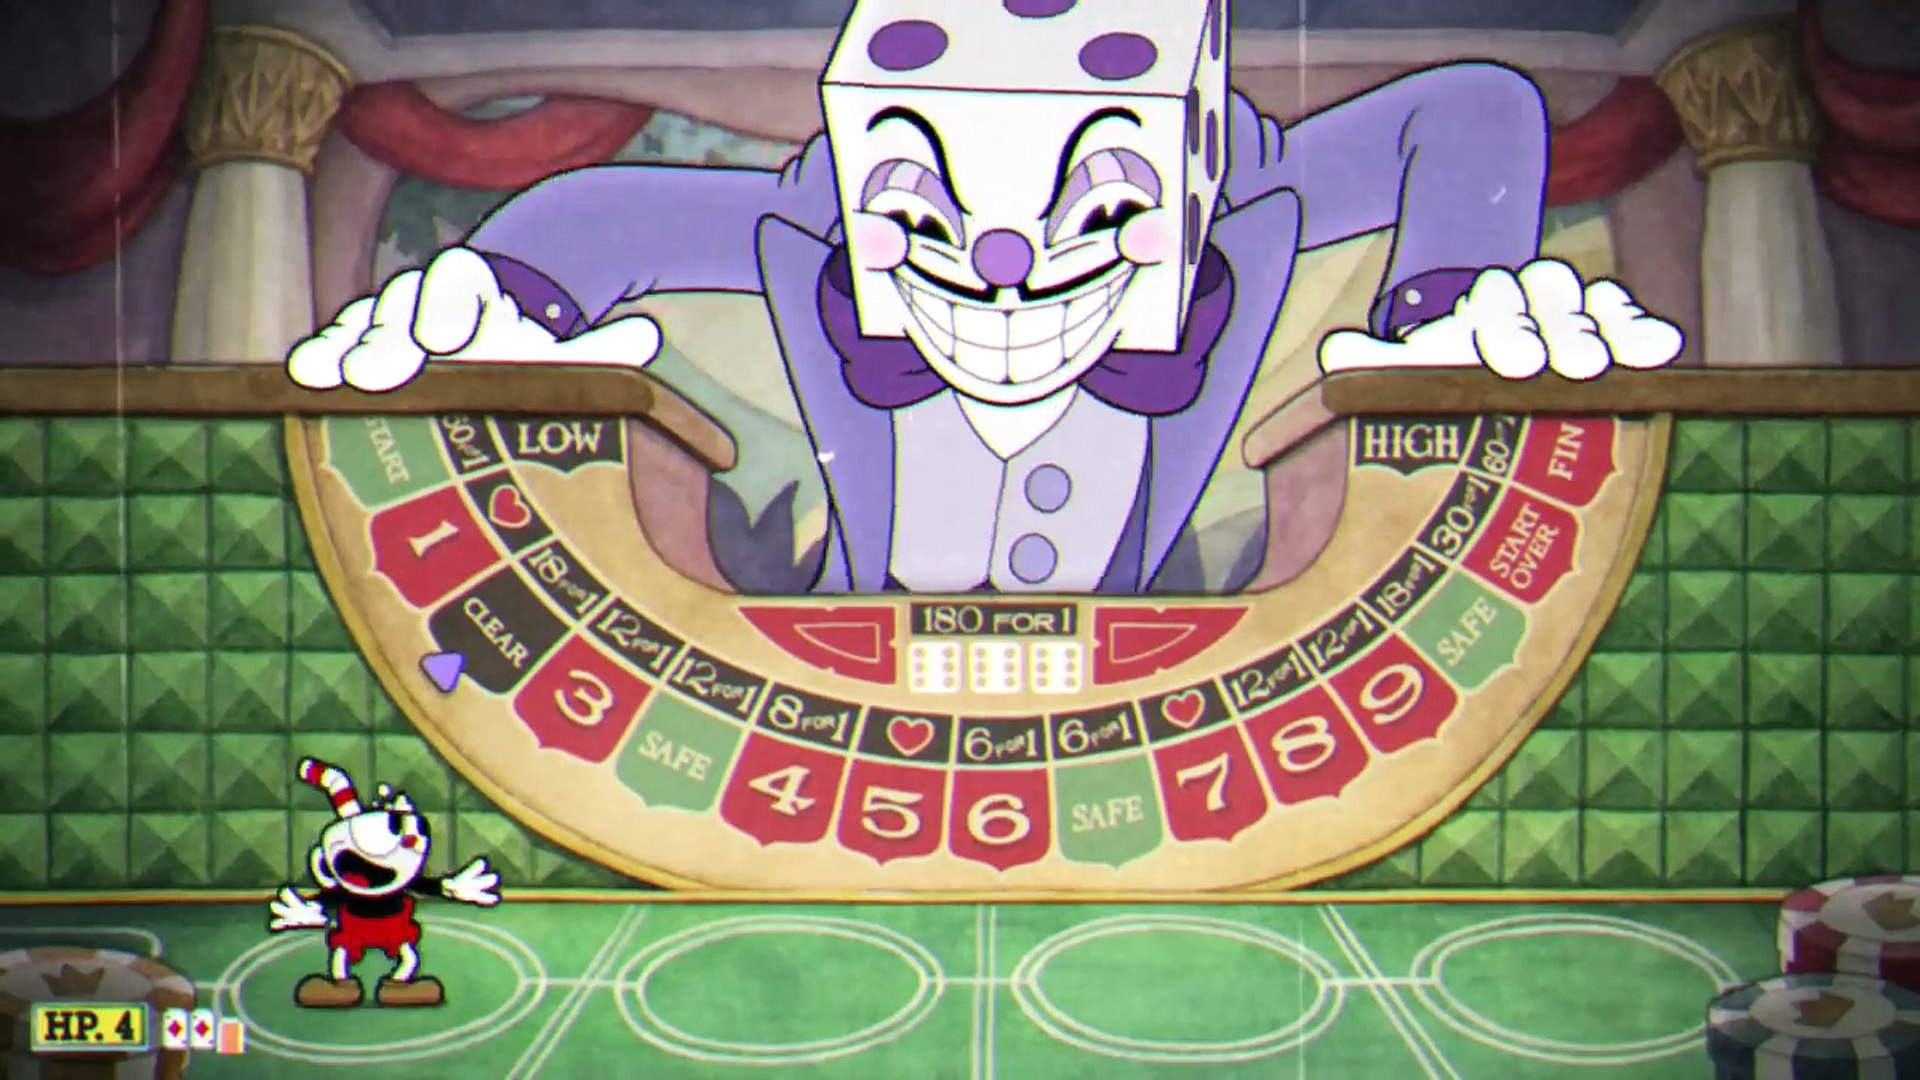 CUPHEAD - FINAL BOSS / KING DICE & ENDING Walkthrough Gameplay Part 9 (Xbox  One X) - Dailymotion Video